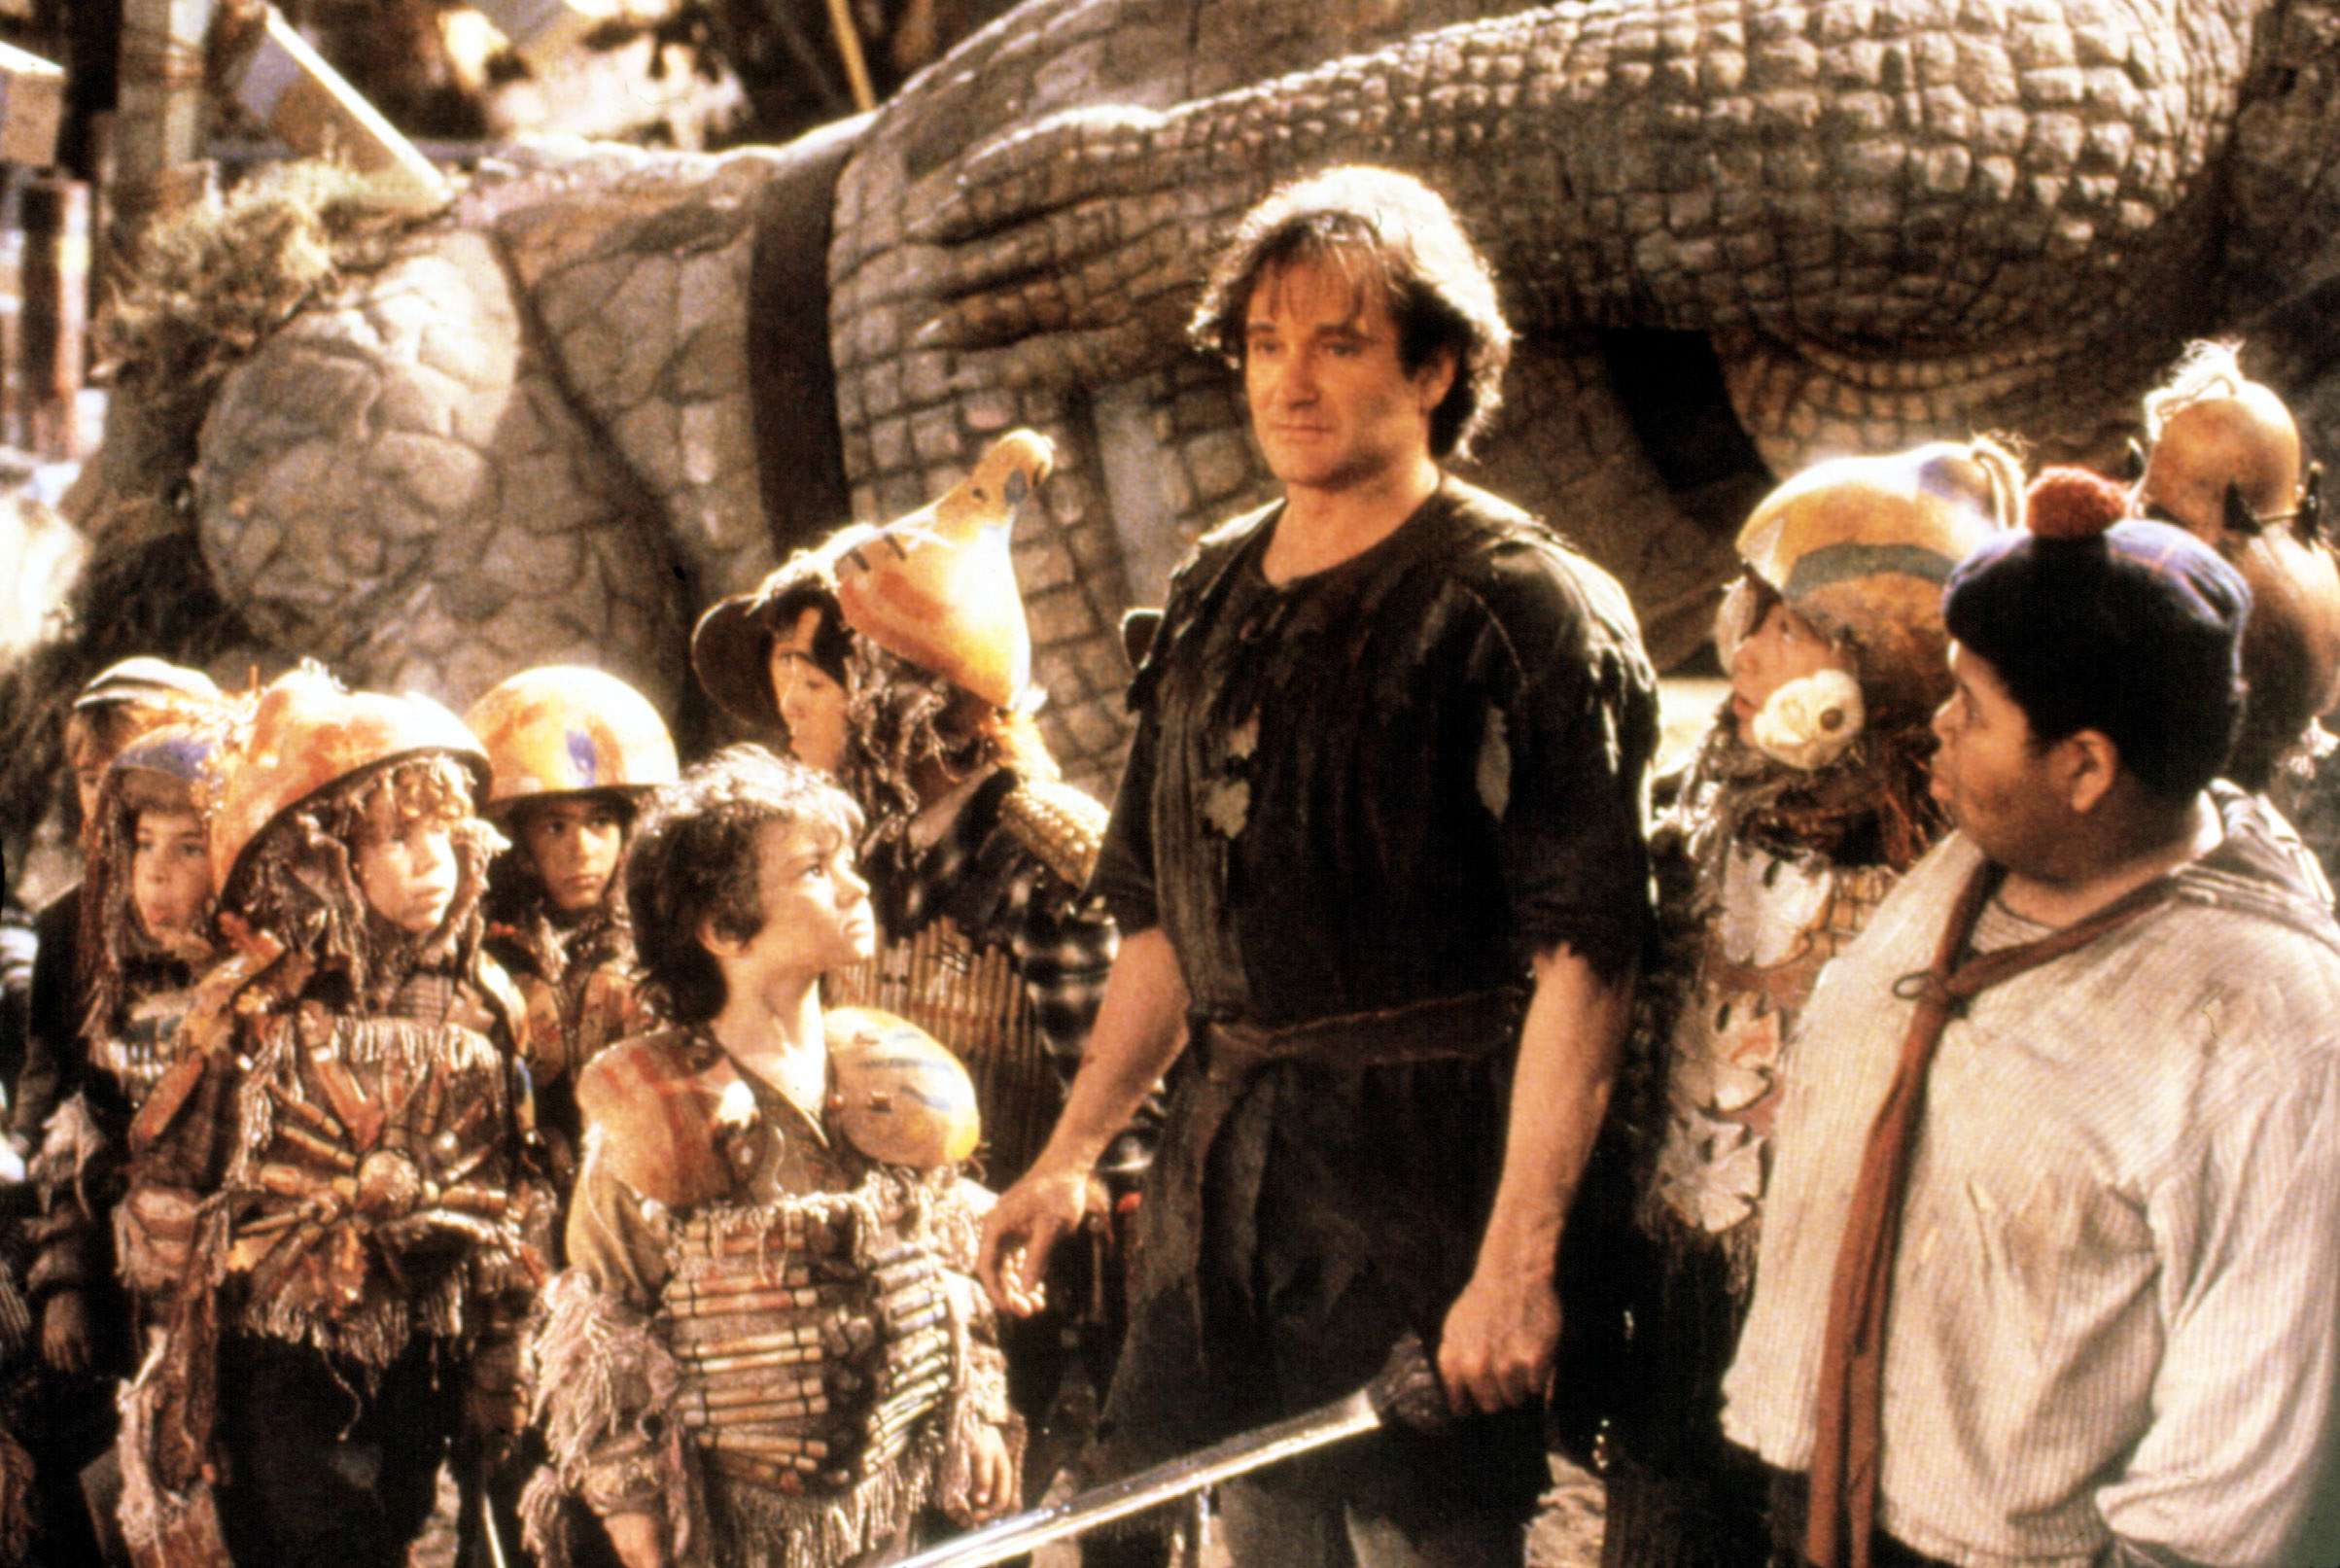 Robin Williams as Peter Pan with a group of Lost Boys looking up to him